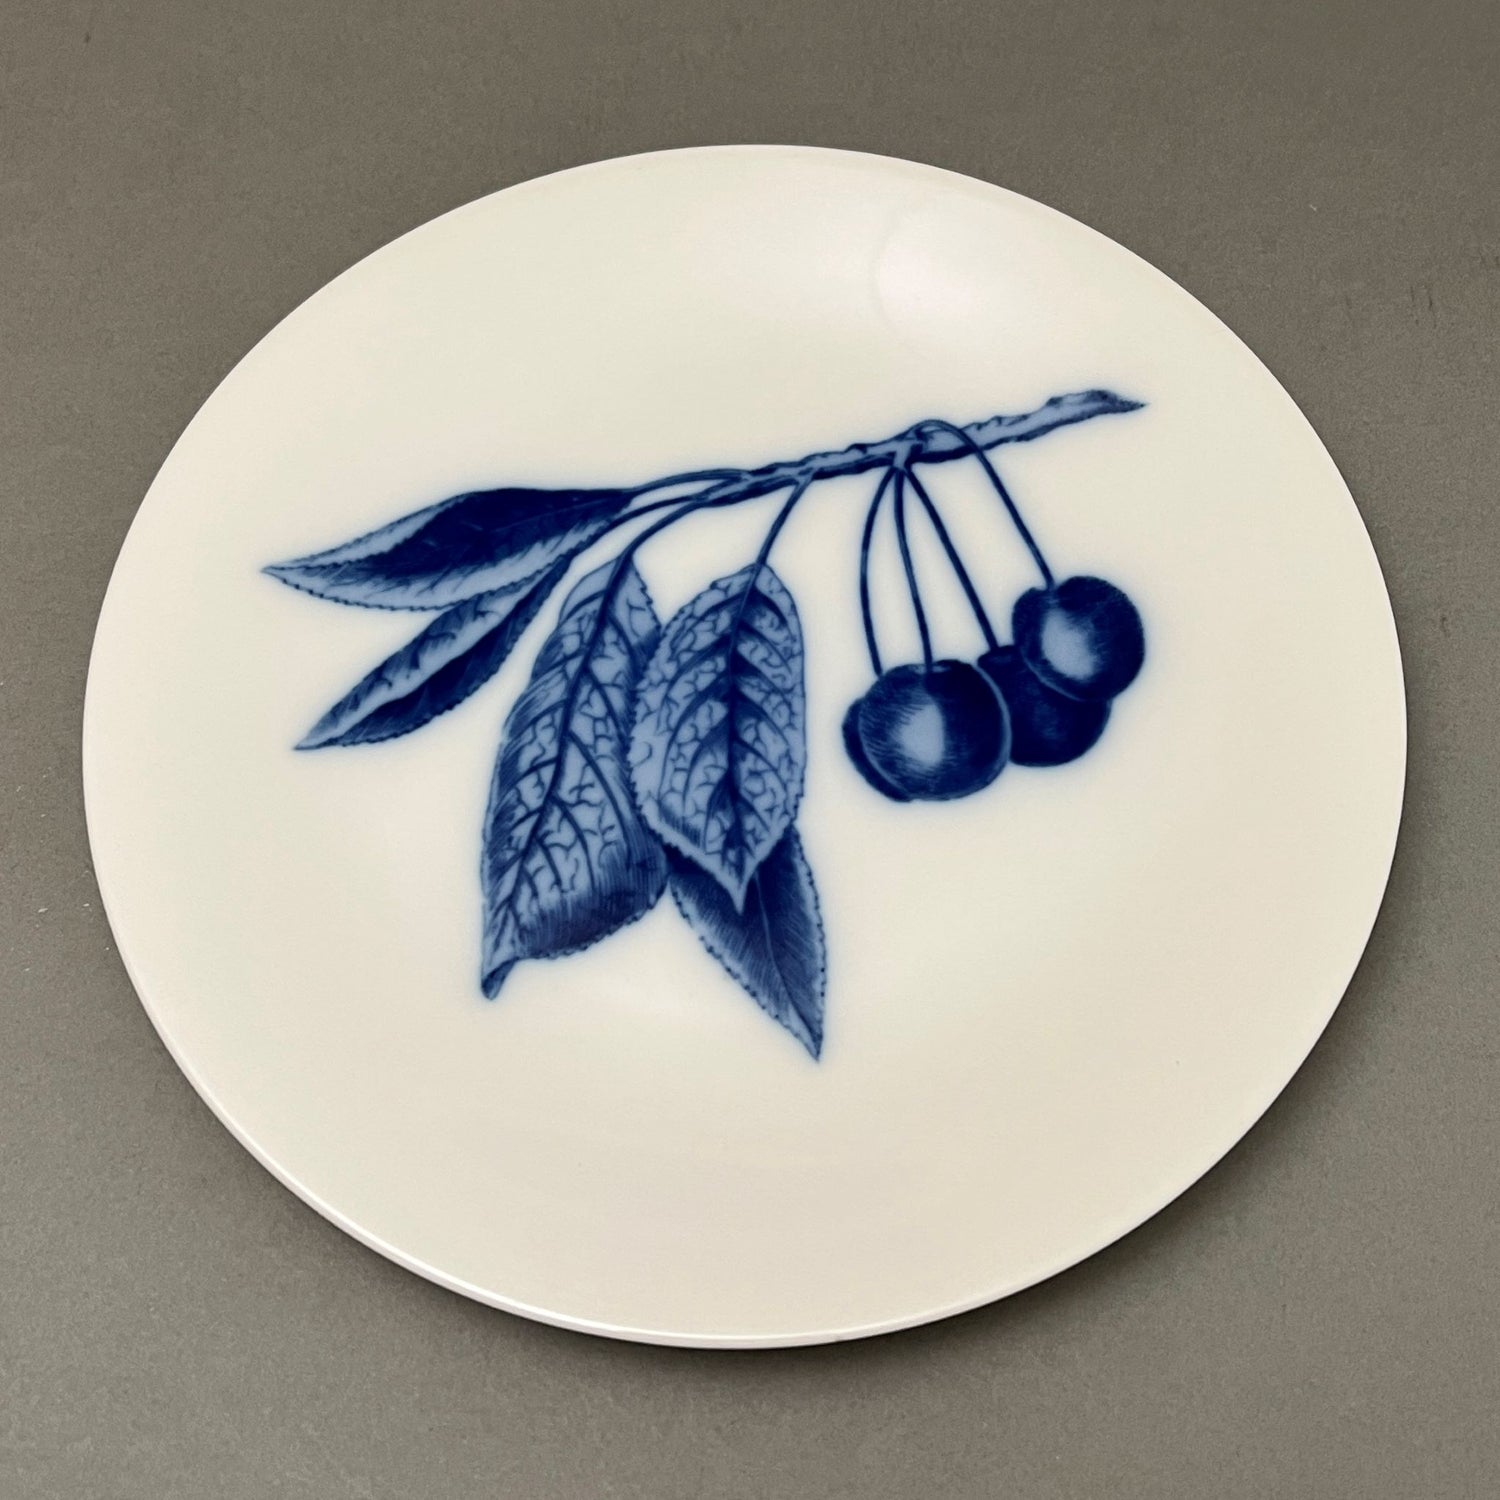 White plate with blue fruit design sitting on gray background